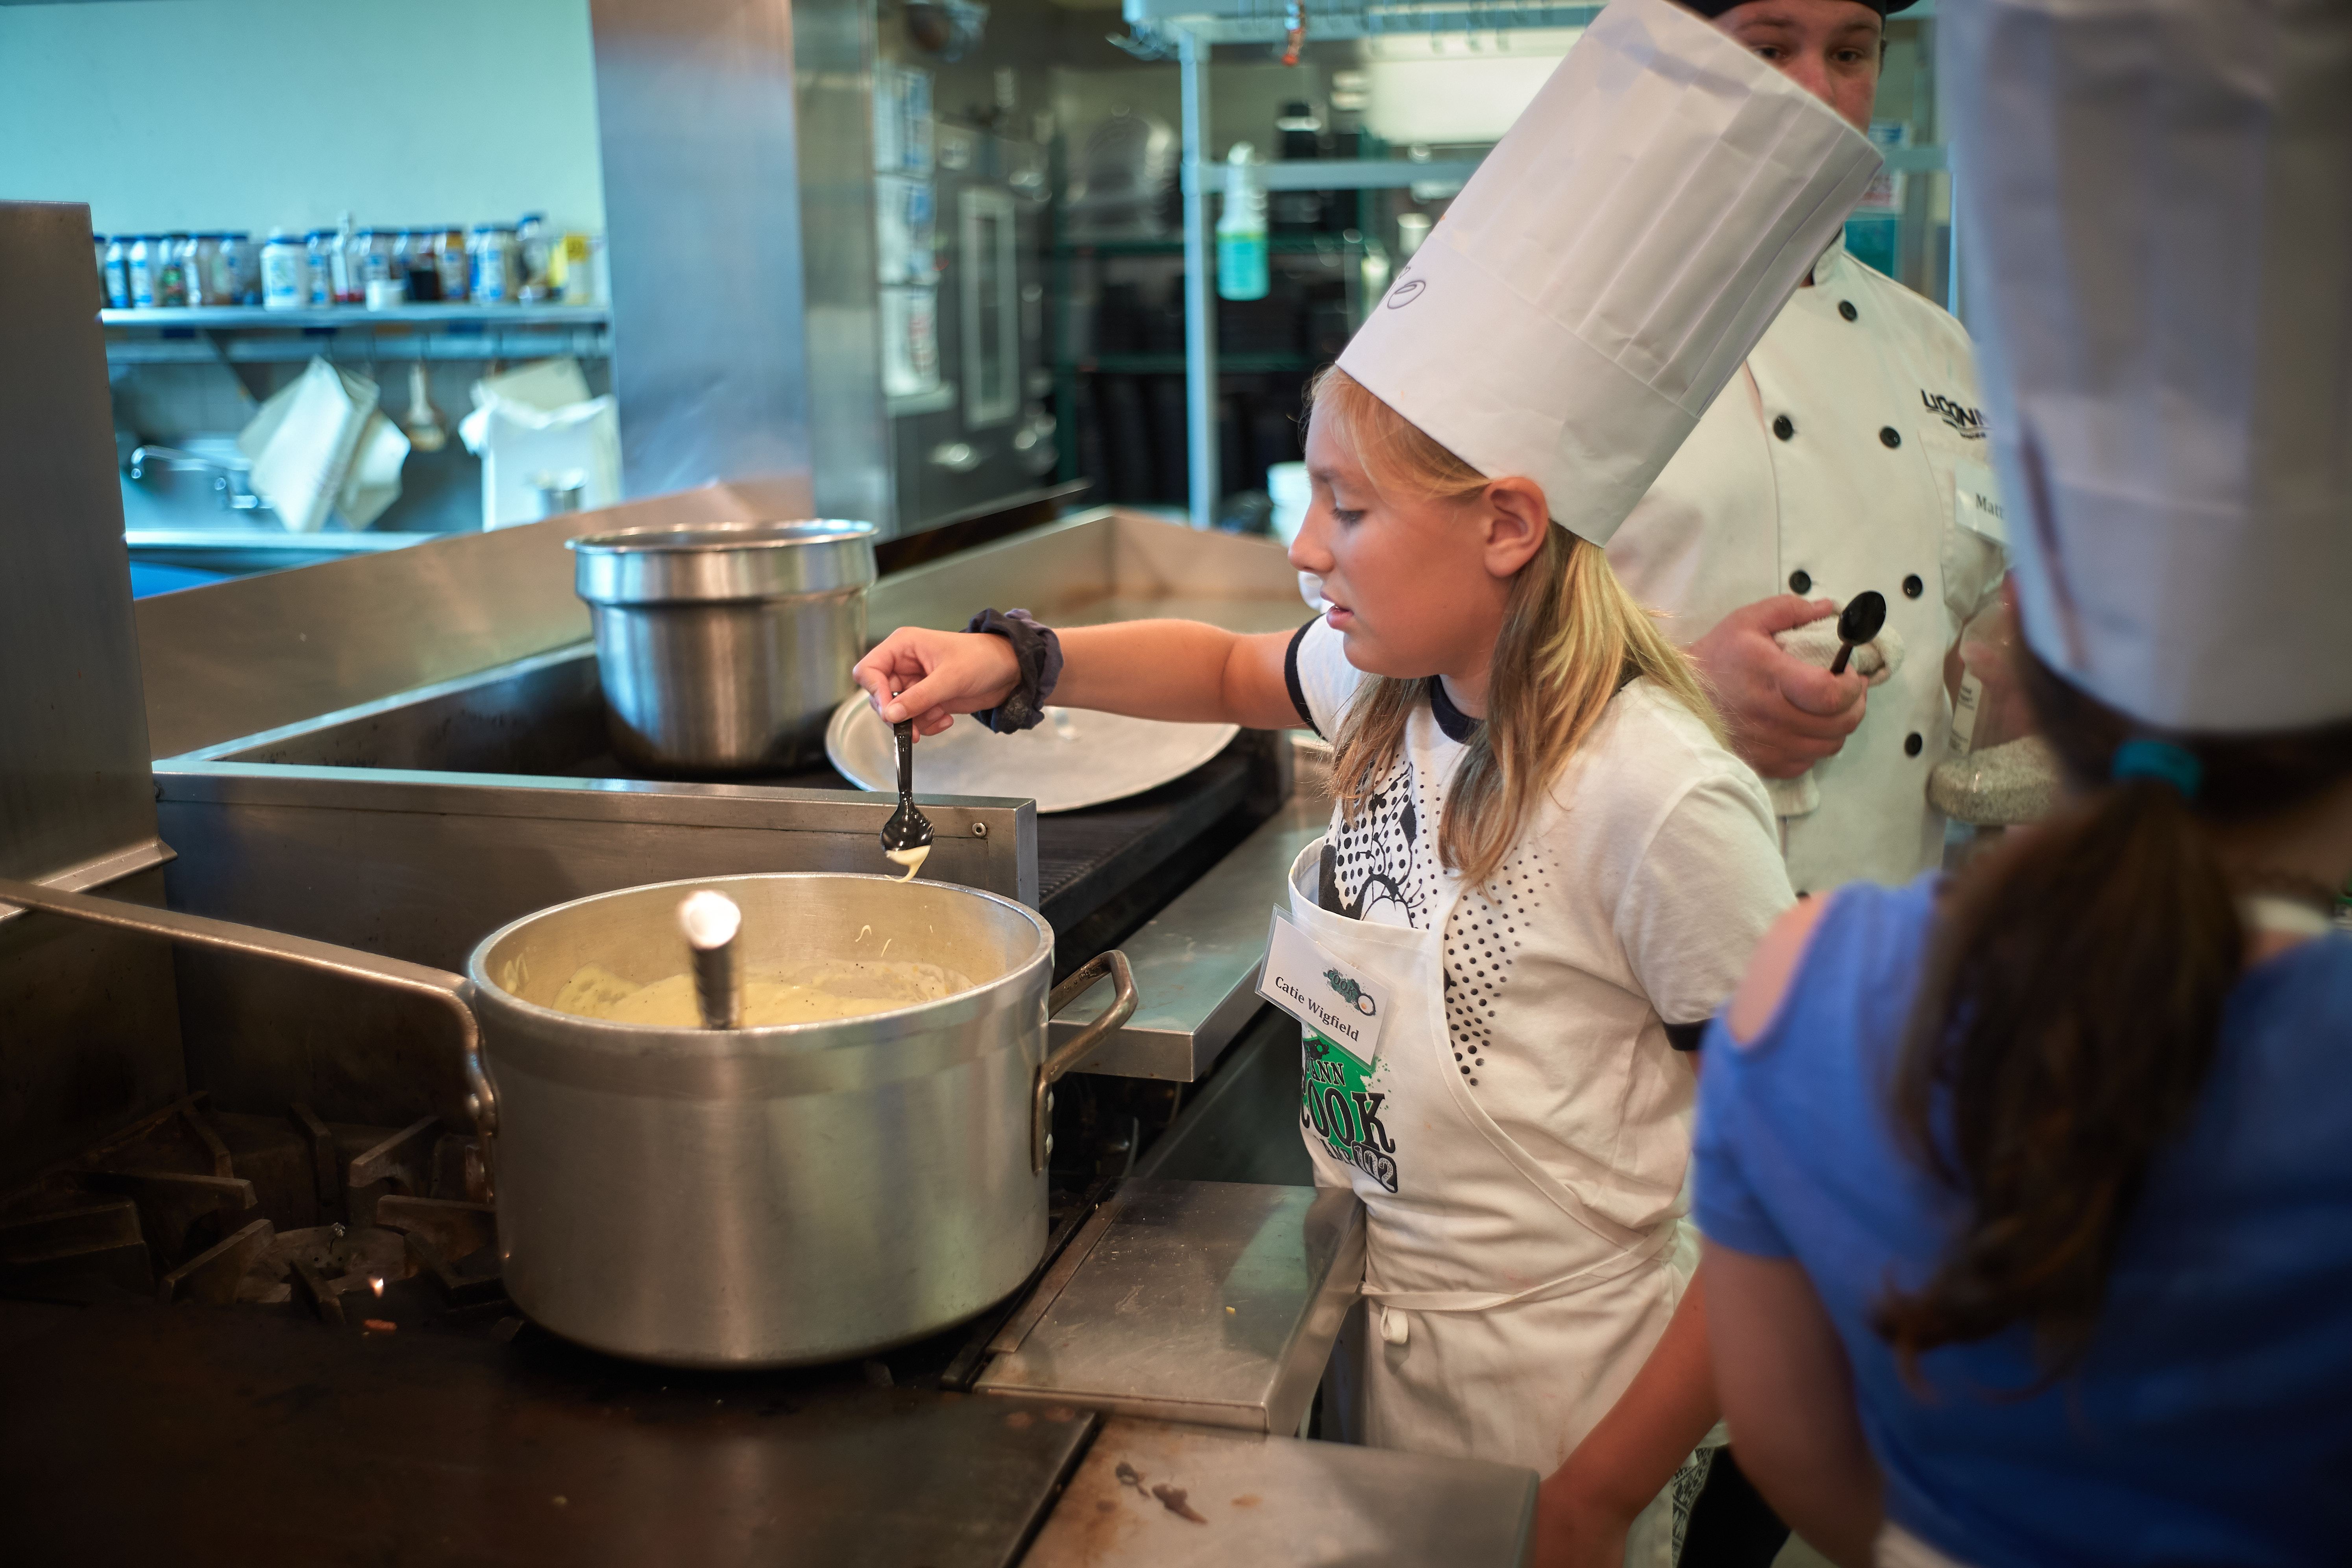 Catie Wigfield, 10, of Baltic, takes a taste of cheese sauce during a competition held at the UCann Cook Camp at Gelfenbien Commons on July 18, 2019. (Peter Morenus/UConn Photo)